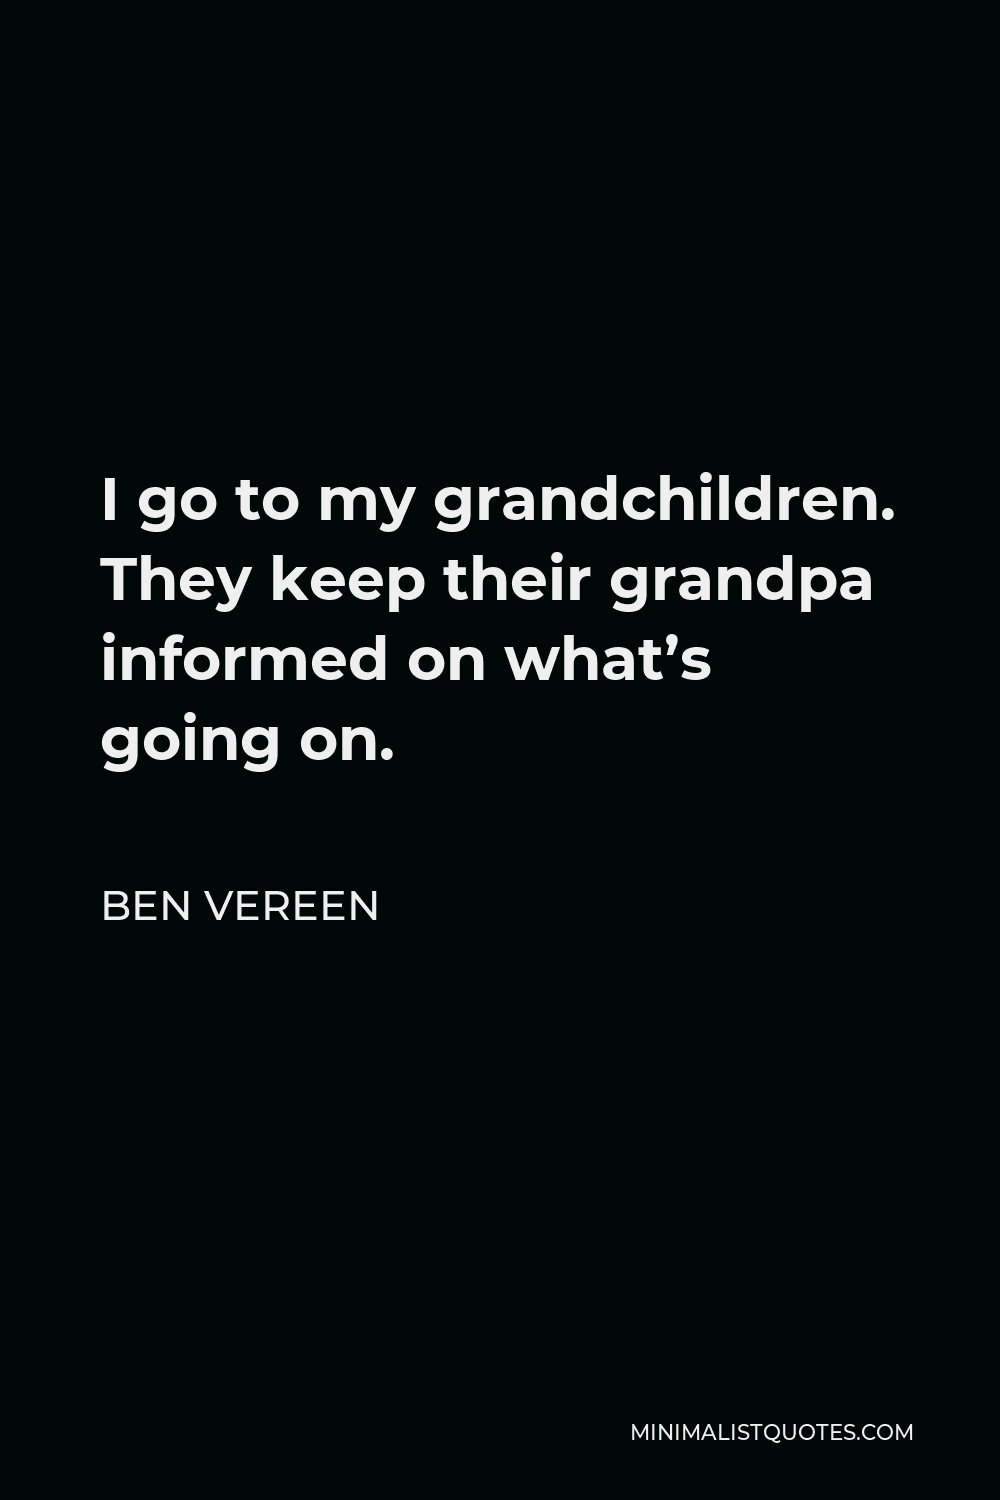 Ben Vereen Quote - I go to my grandchildren. They keep their grandpa informed on what’s going on.